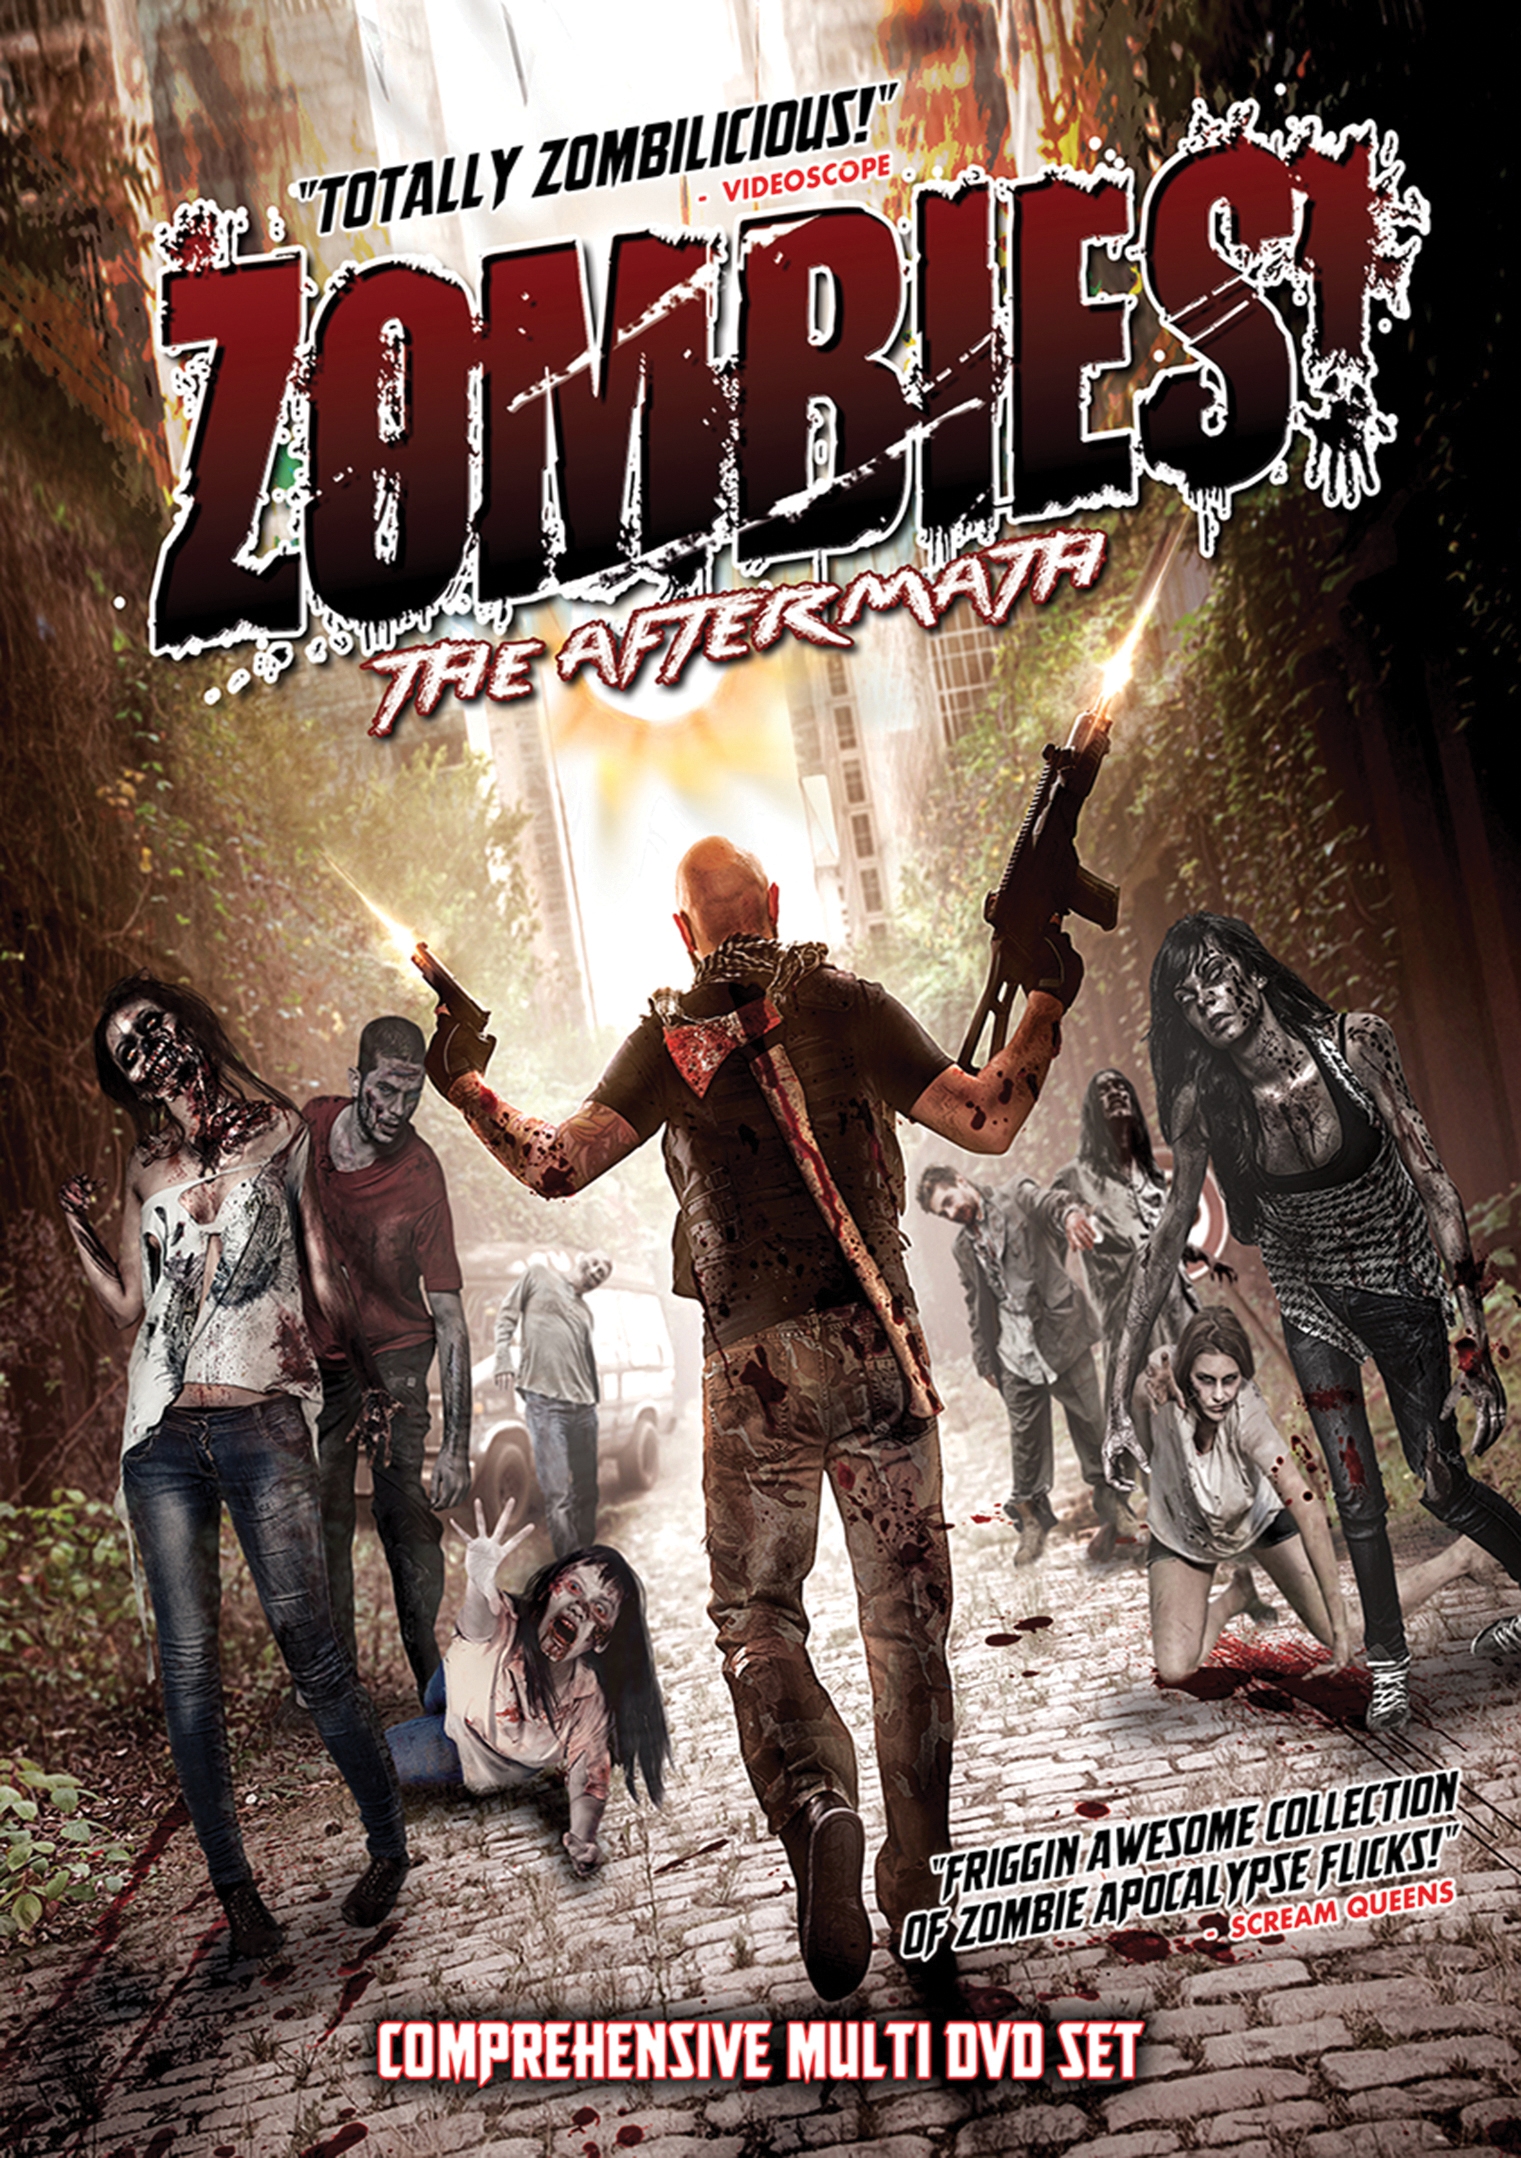 DVD REVIEW] 'Zombies' - Rotoscopers